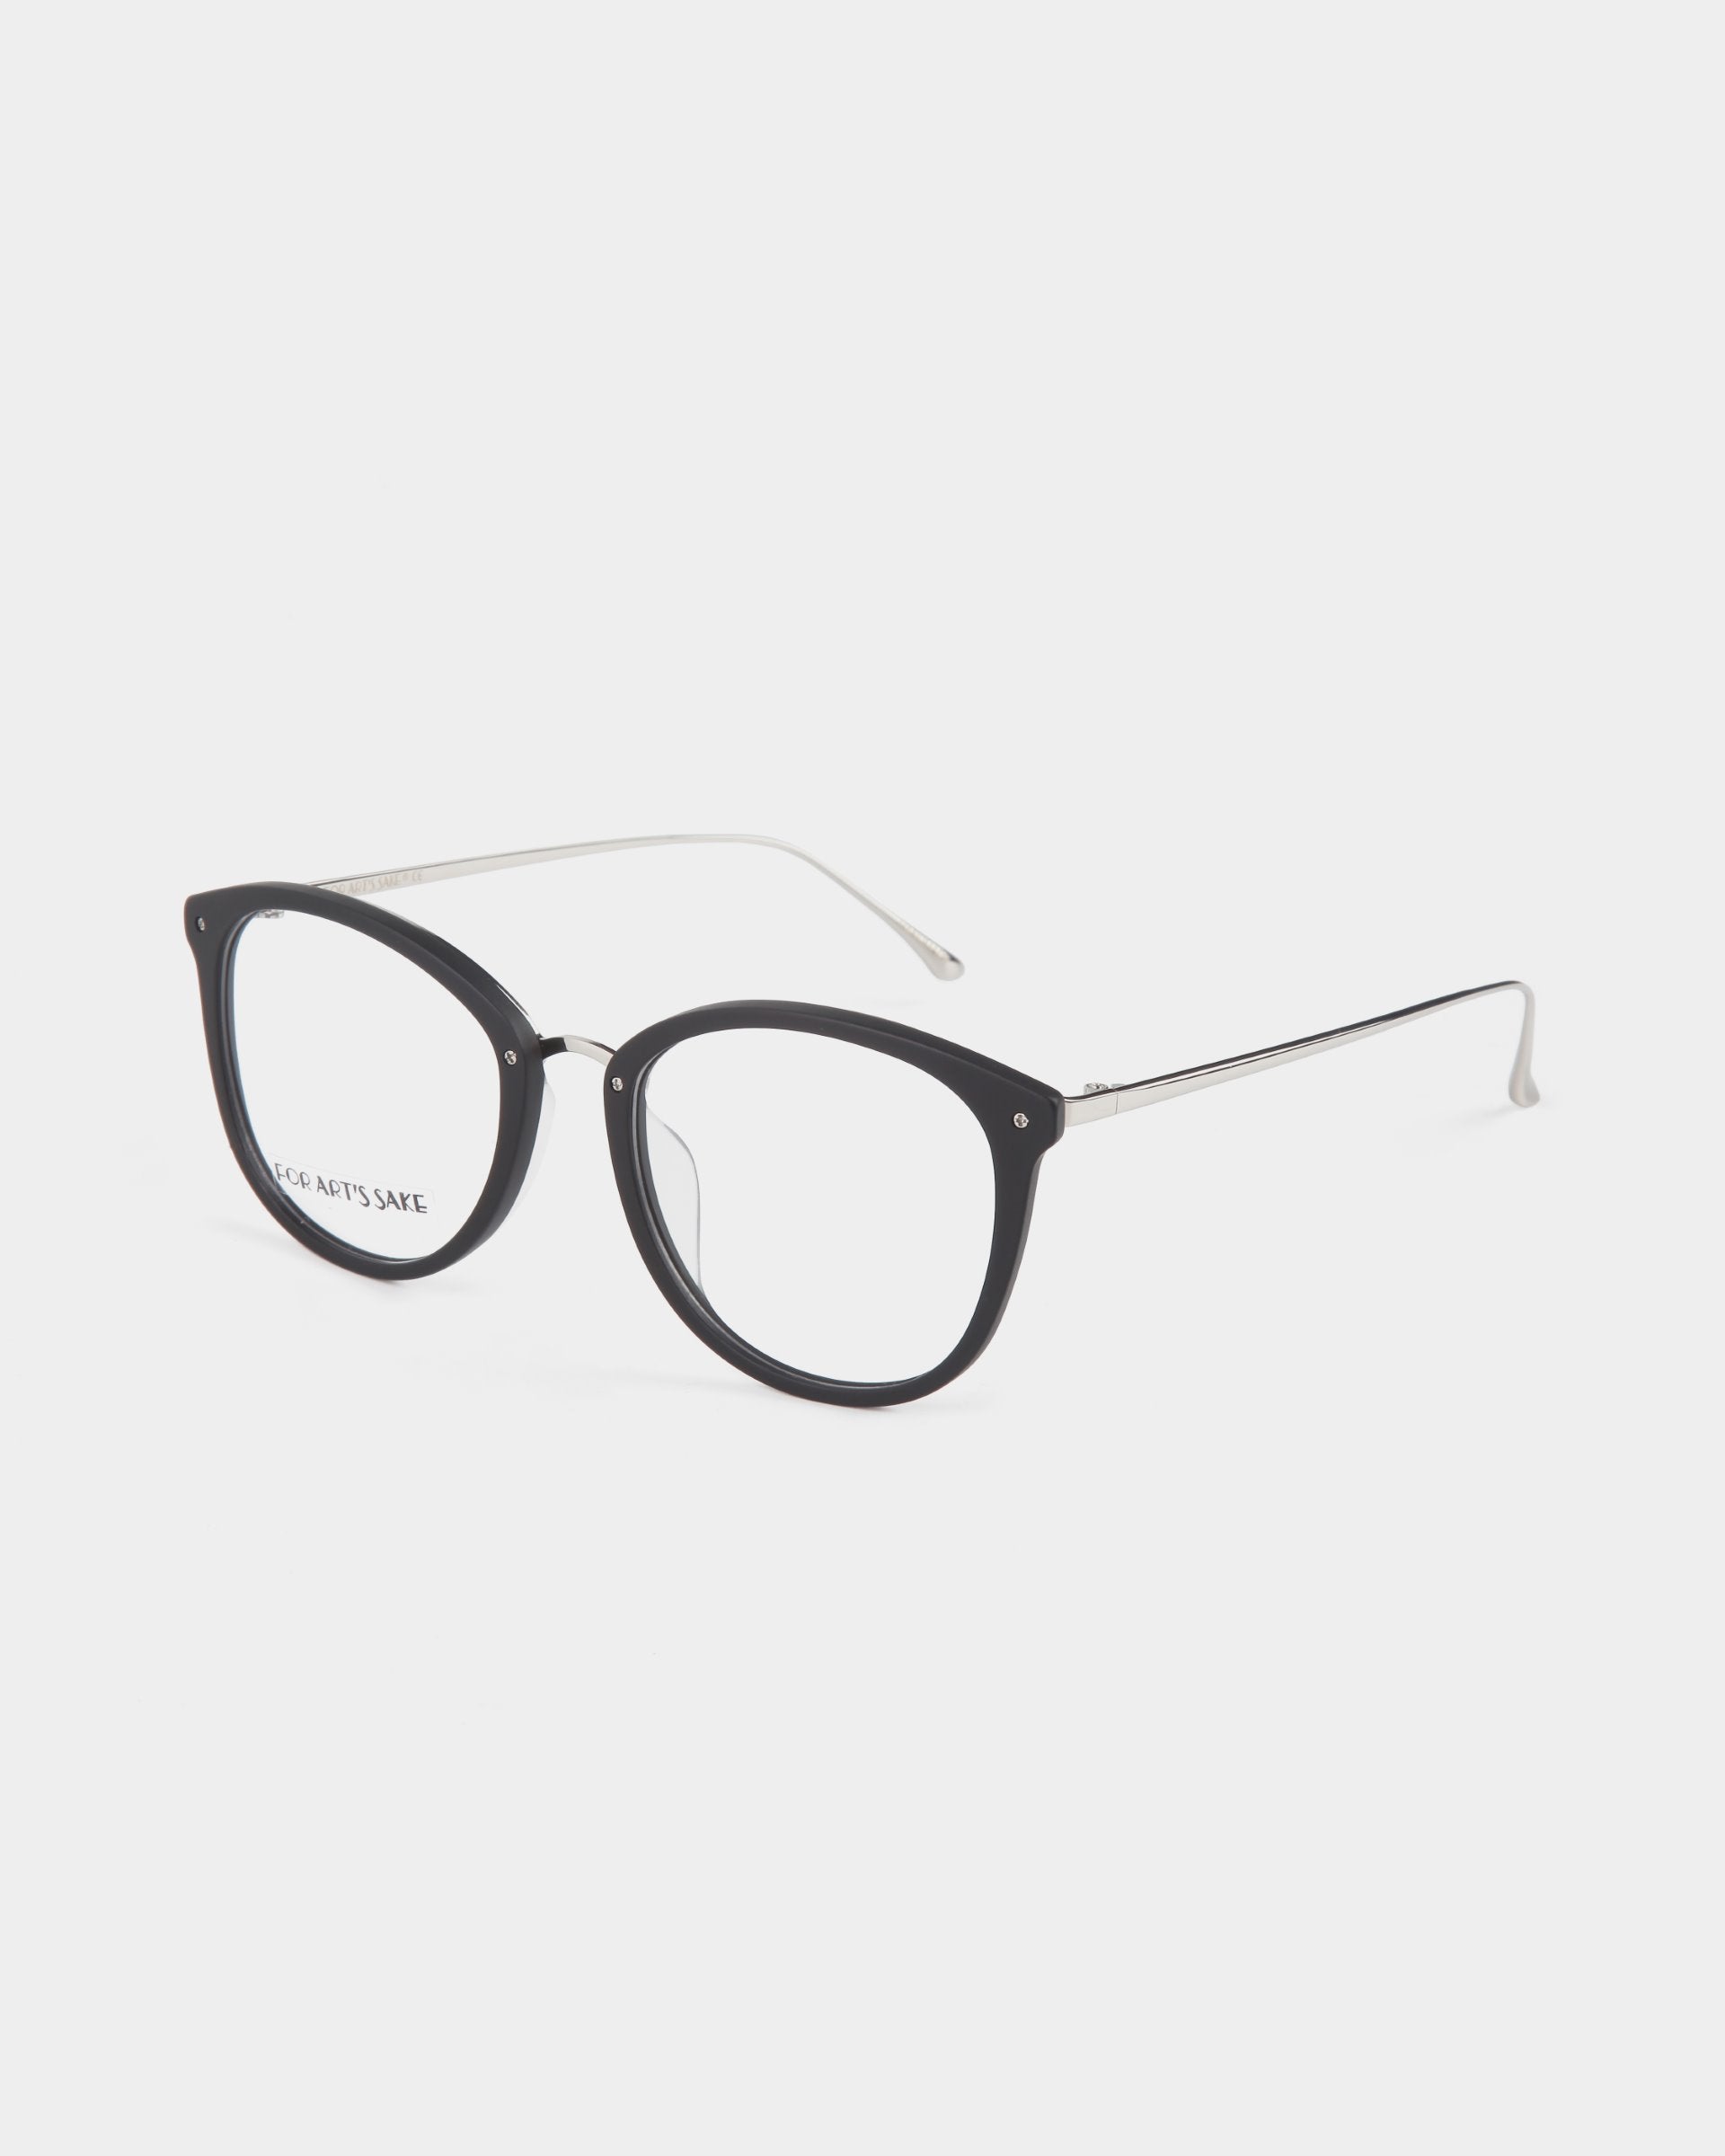 A pair of For Art&#39;s Sake® Club eyeglasses with a black, round frame and thin, metallic temples. The lenses are clear, reflecting light and equipped with a blue light filter. The background is plain white.